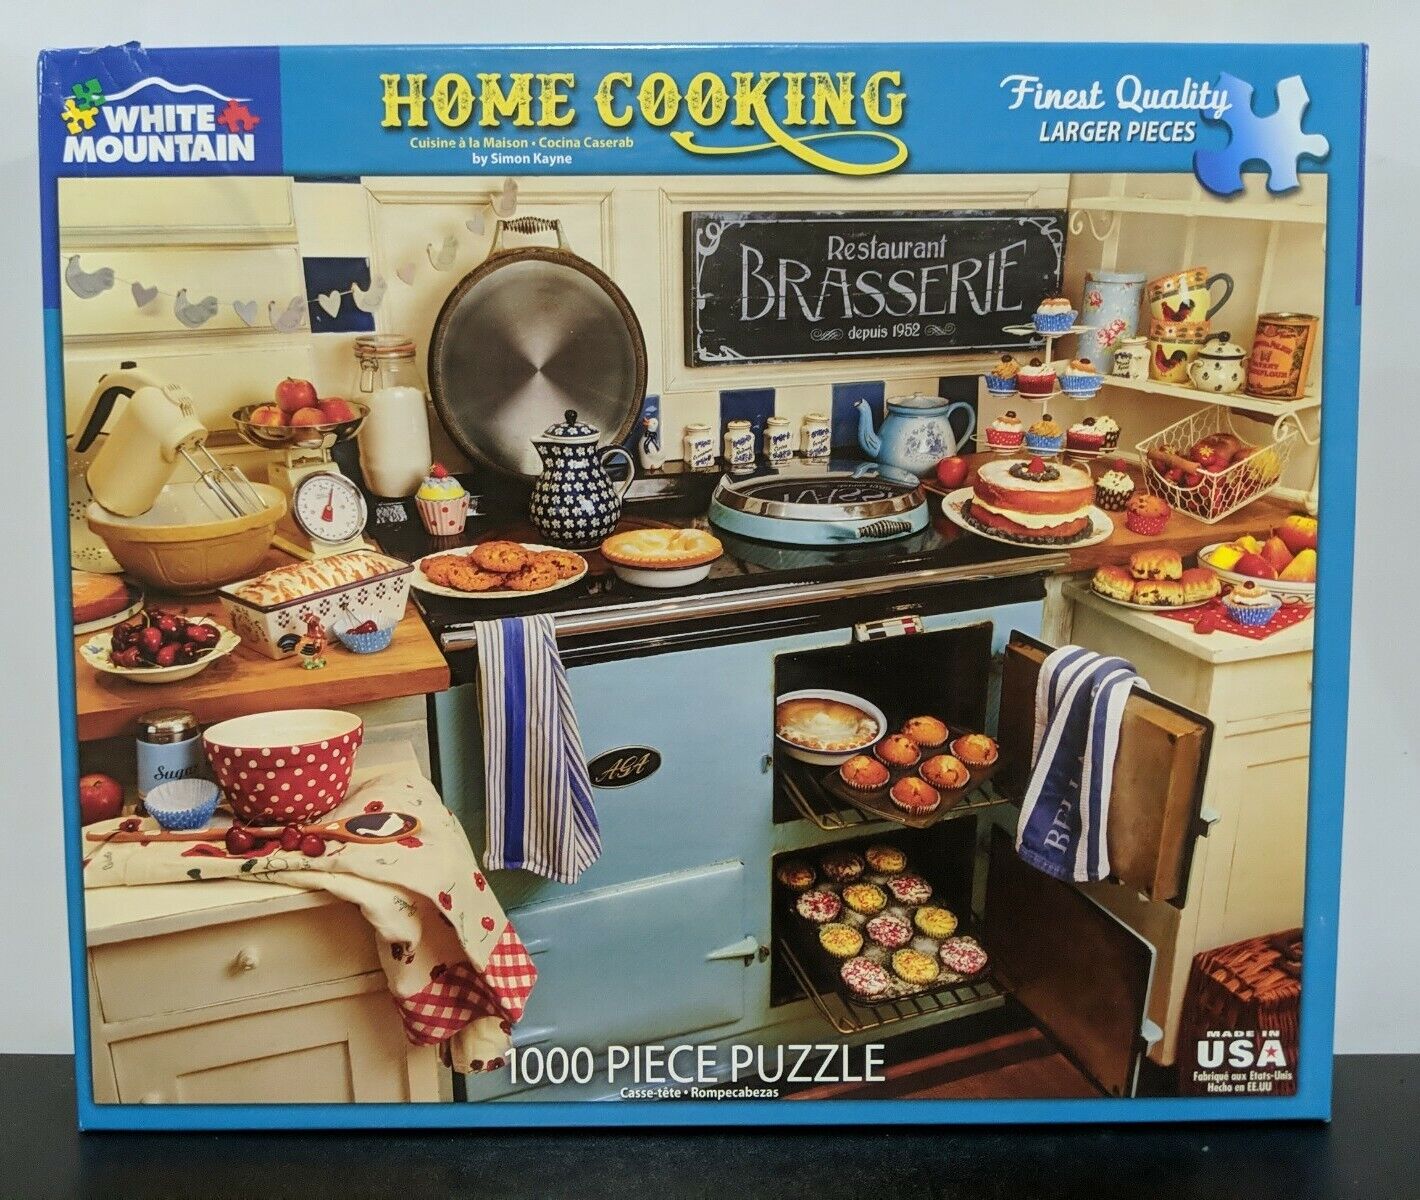 White Mountain 1000 Piece Jigsaw Puzzle "Home Cooking" - Complete